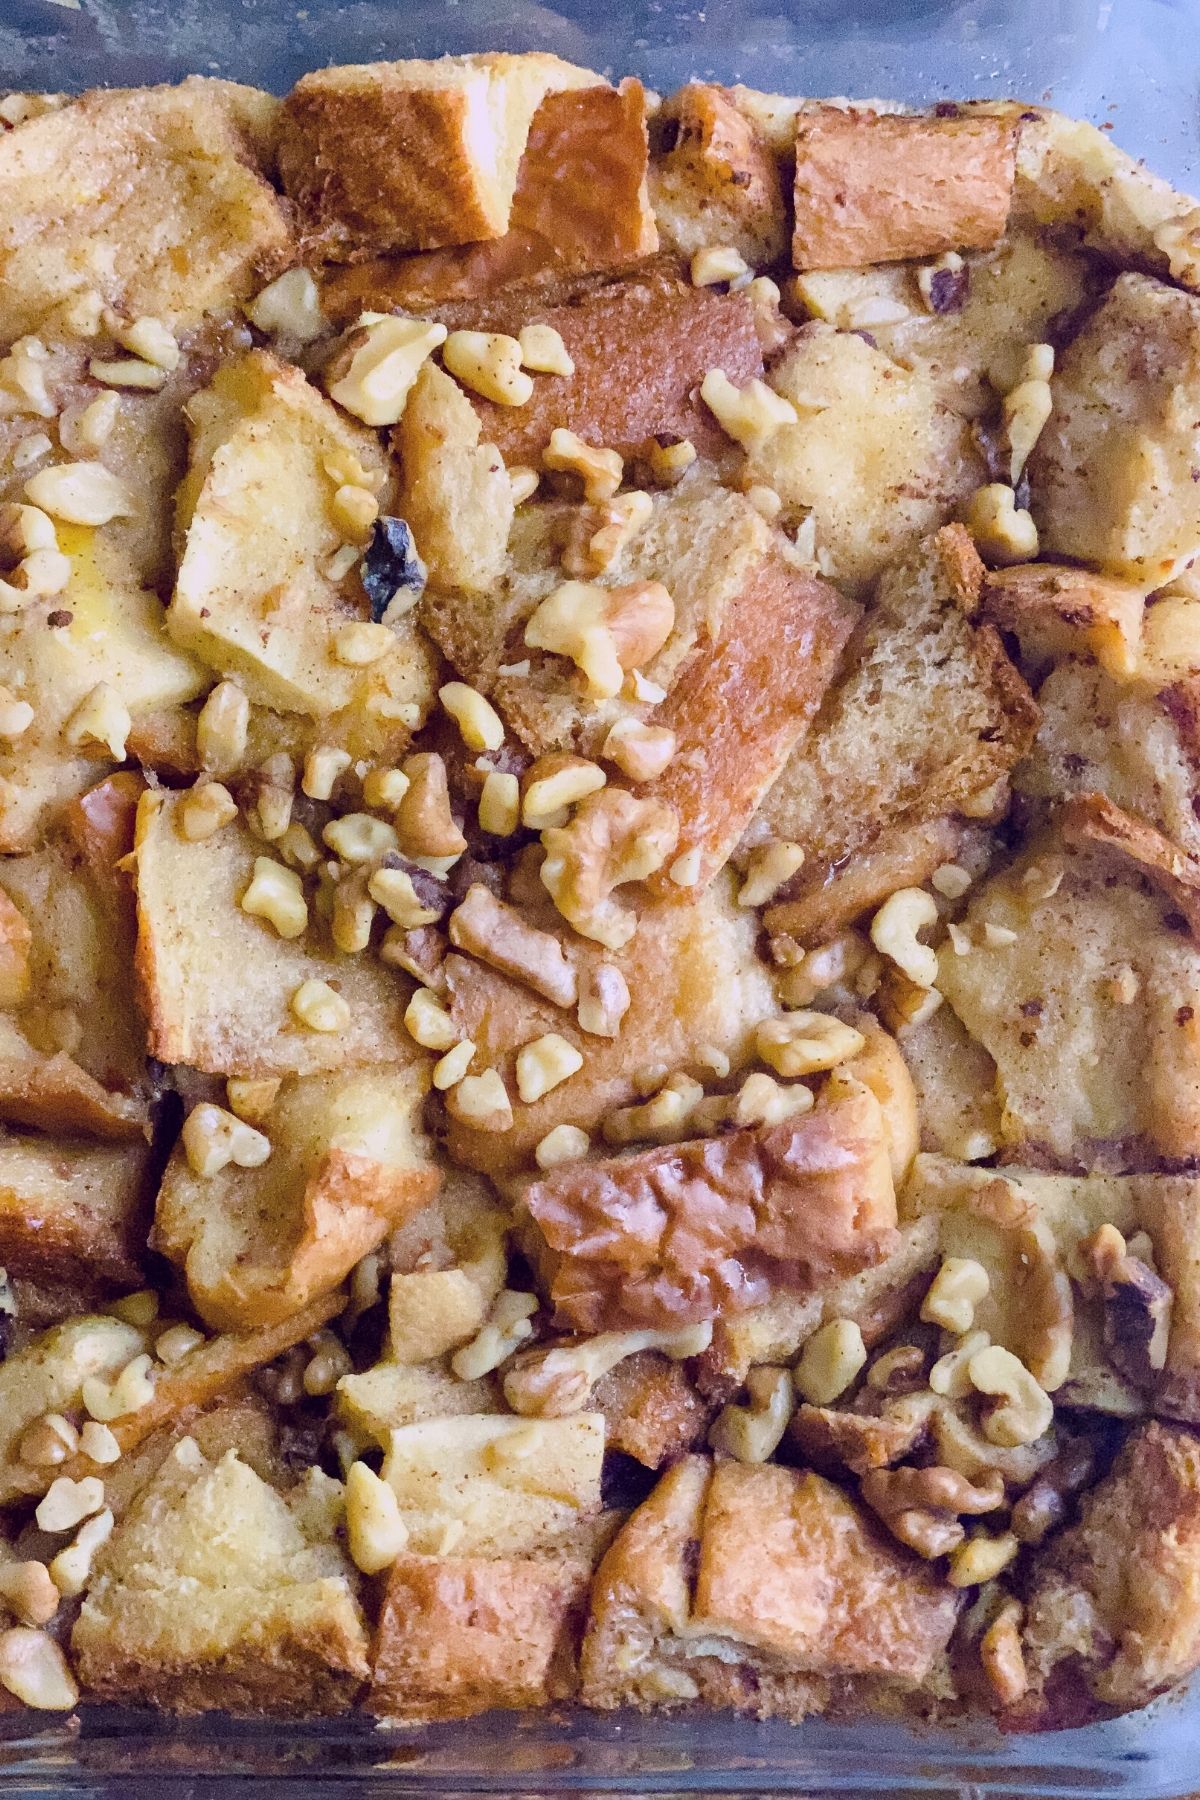 Unbaked bread pudding